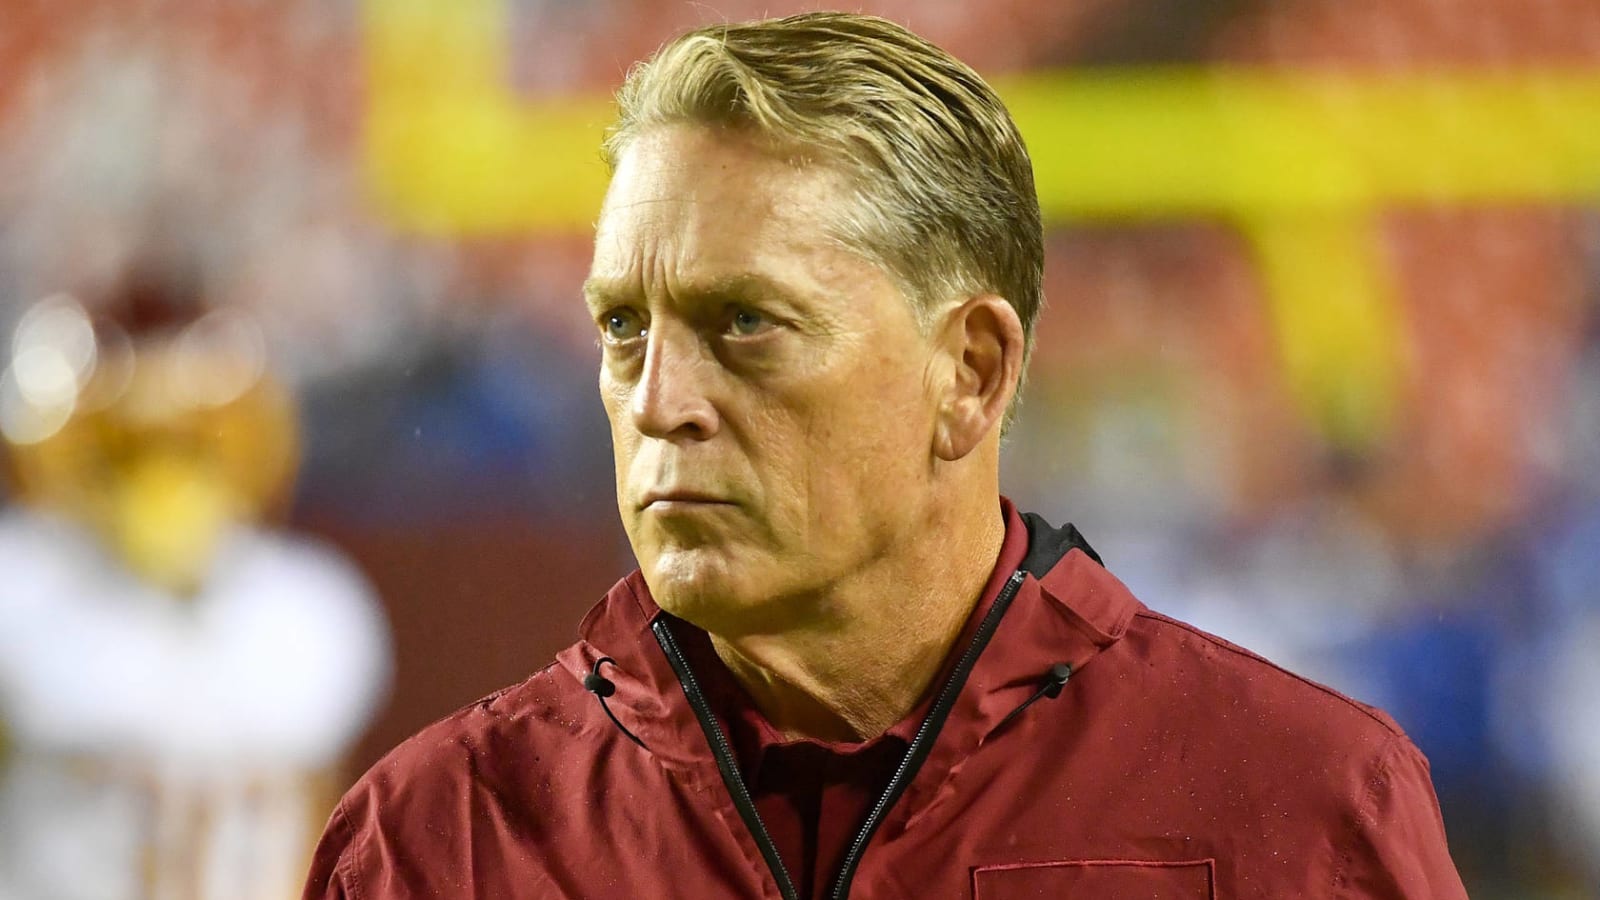 Del Rio on USC opening: 'I'm going to channel Mike Tomlin'